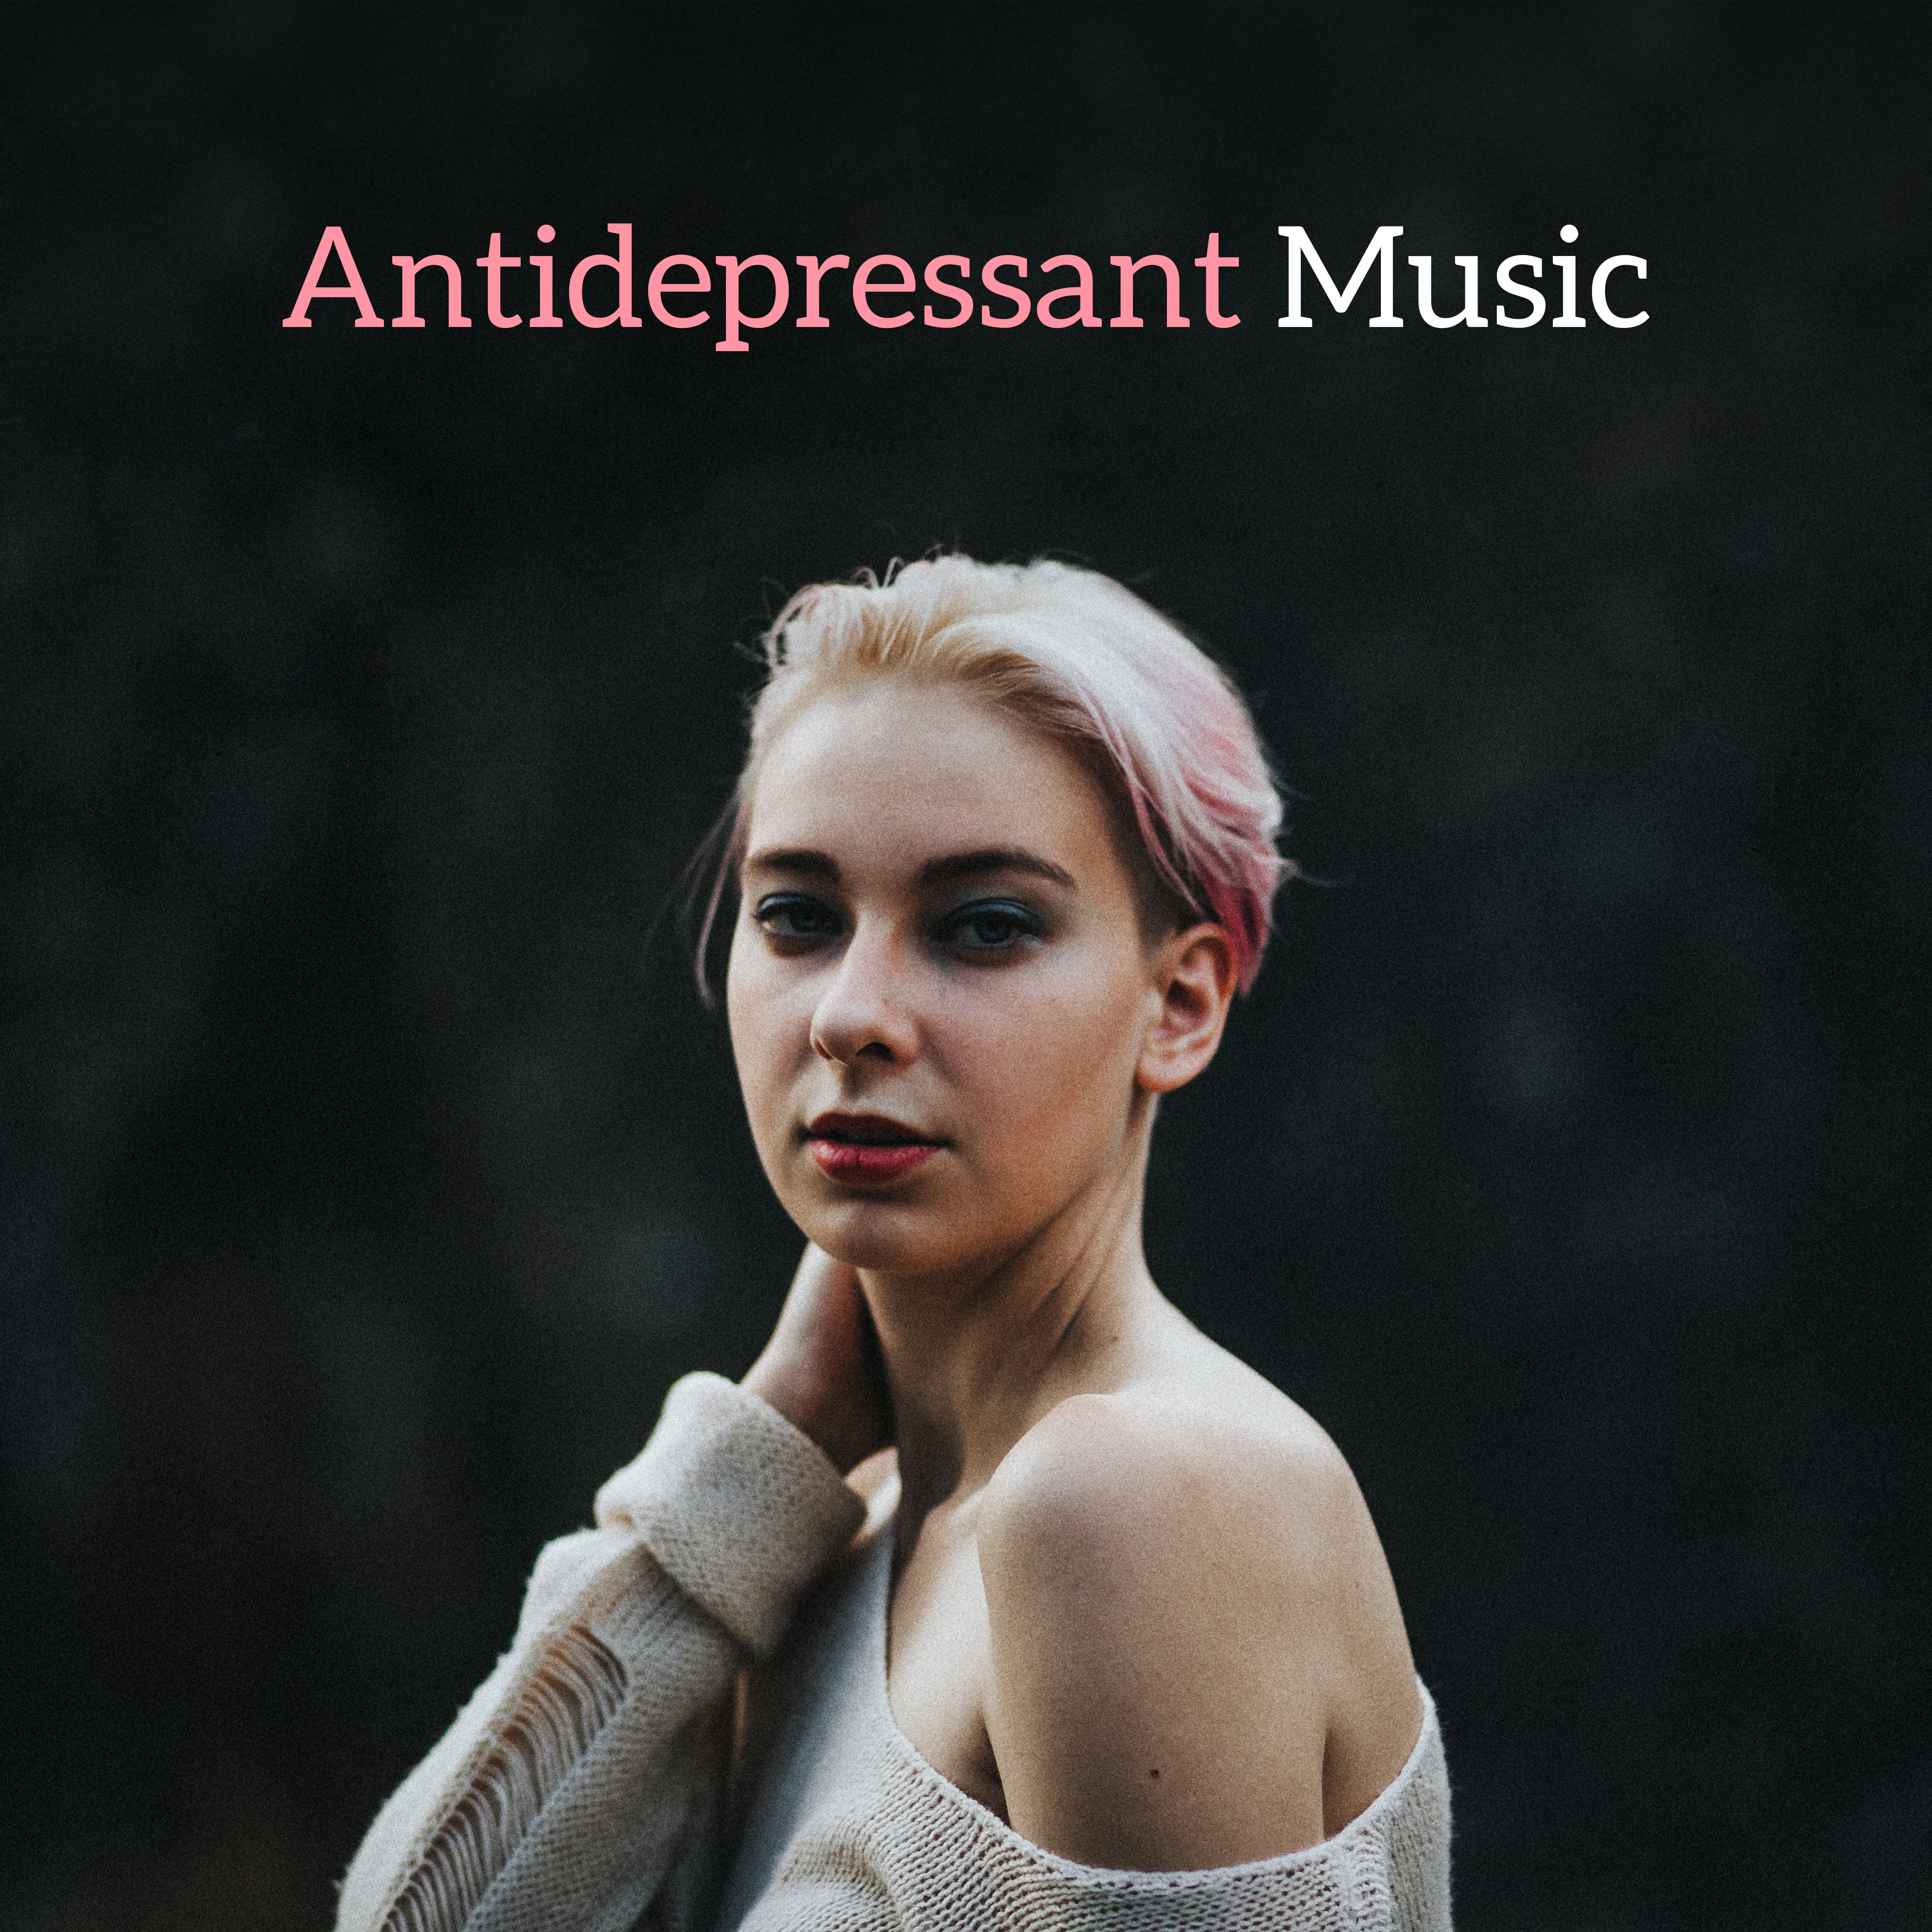 Antidepressant Music  Healing Music, Full Of Calming Nature Sounds, Zen, Bliss, Stress Relief, Reduce Anxiety